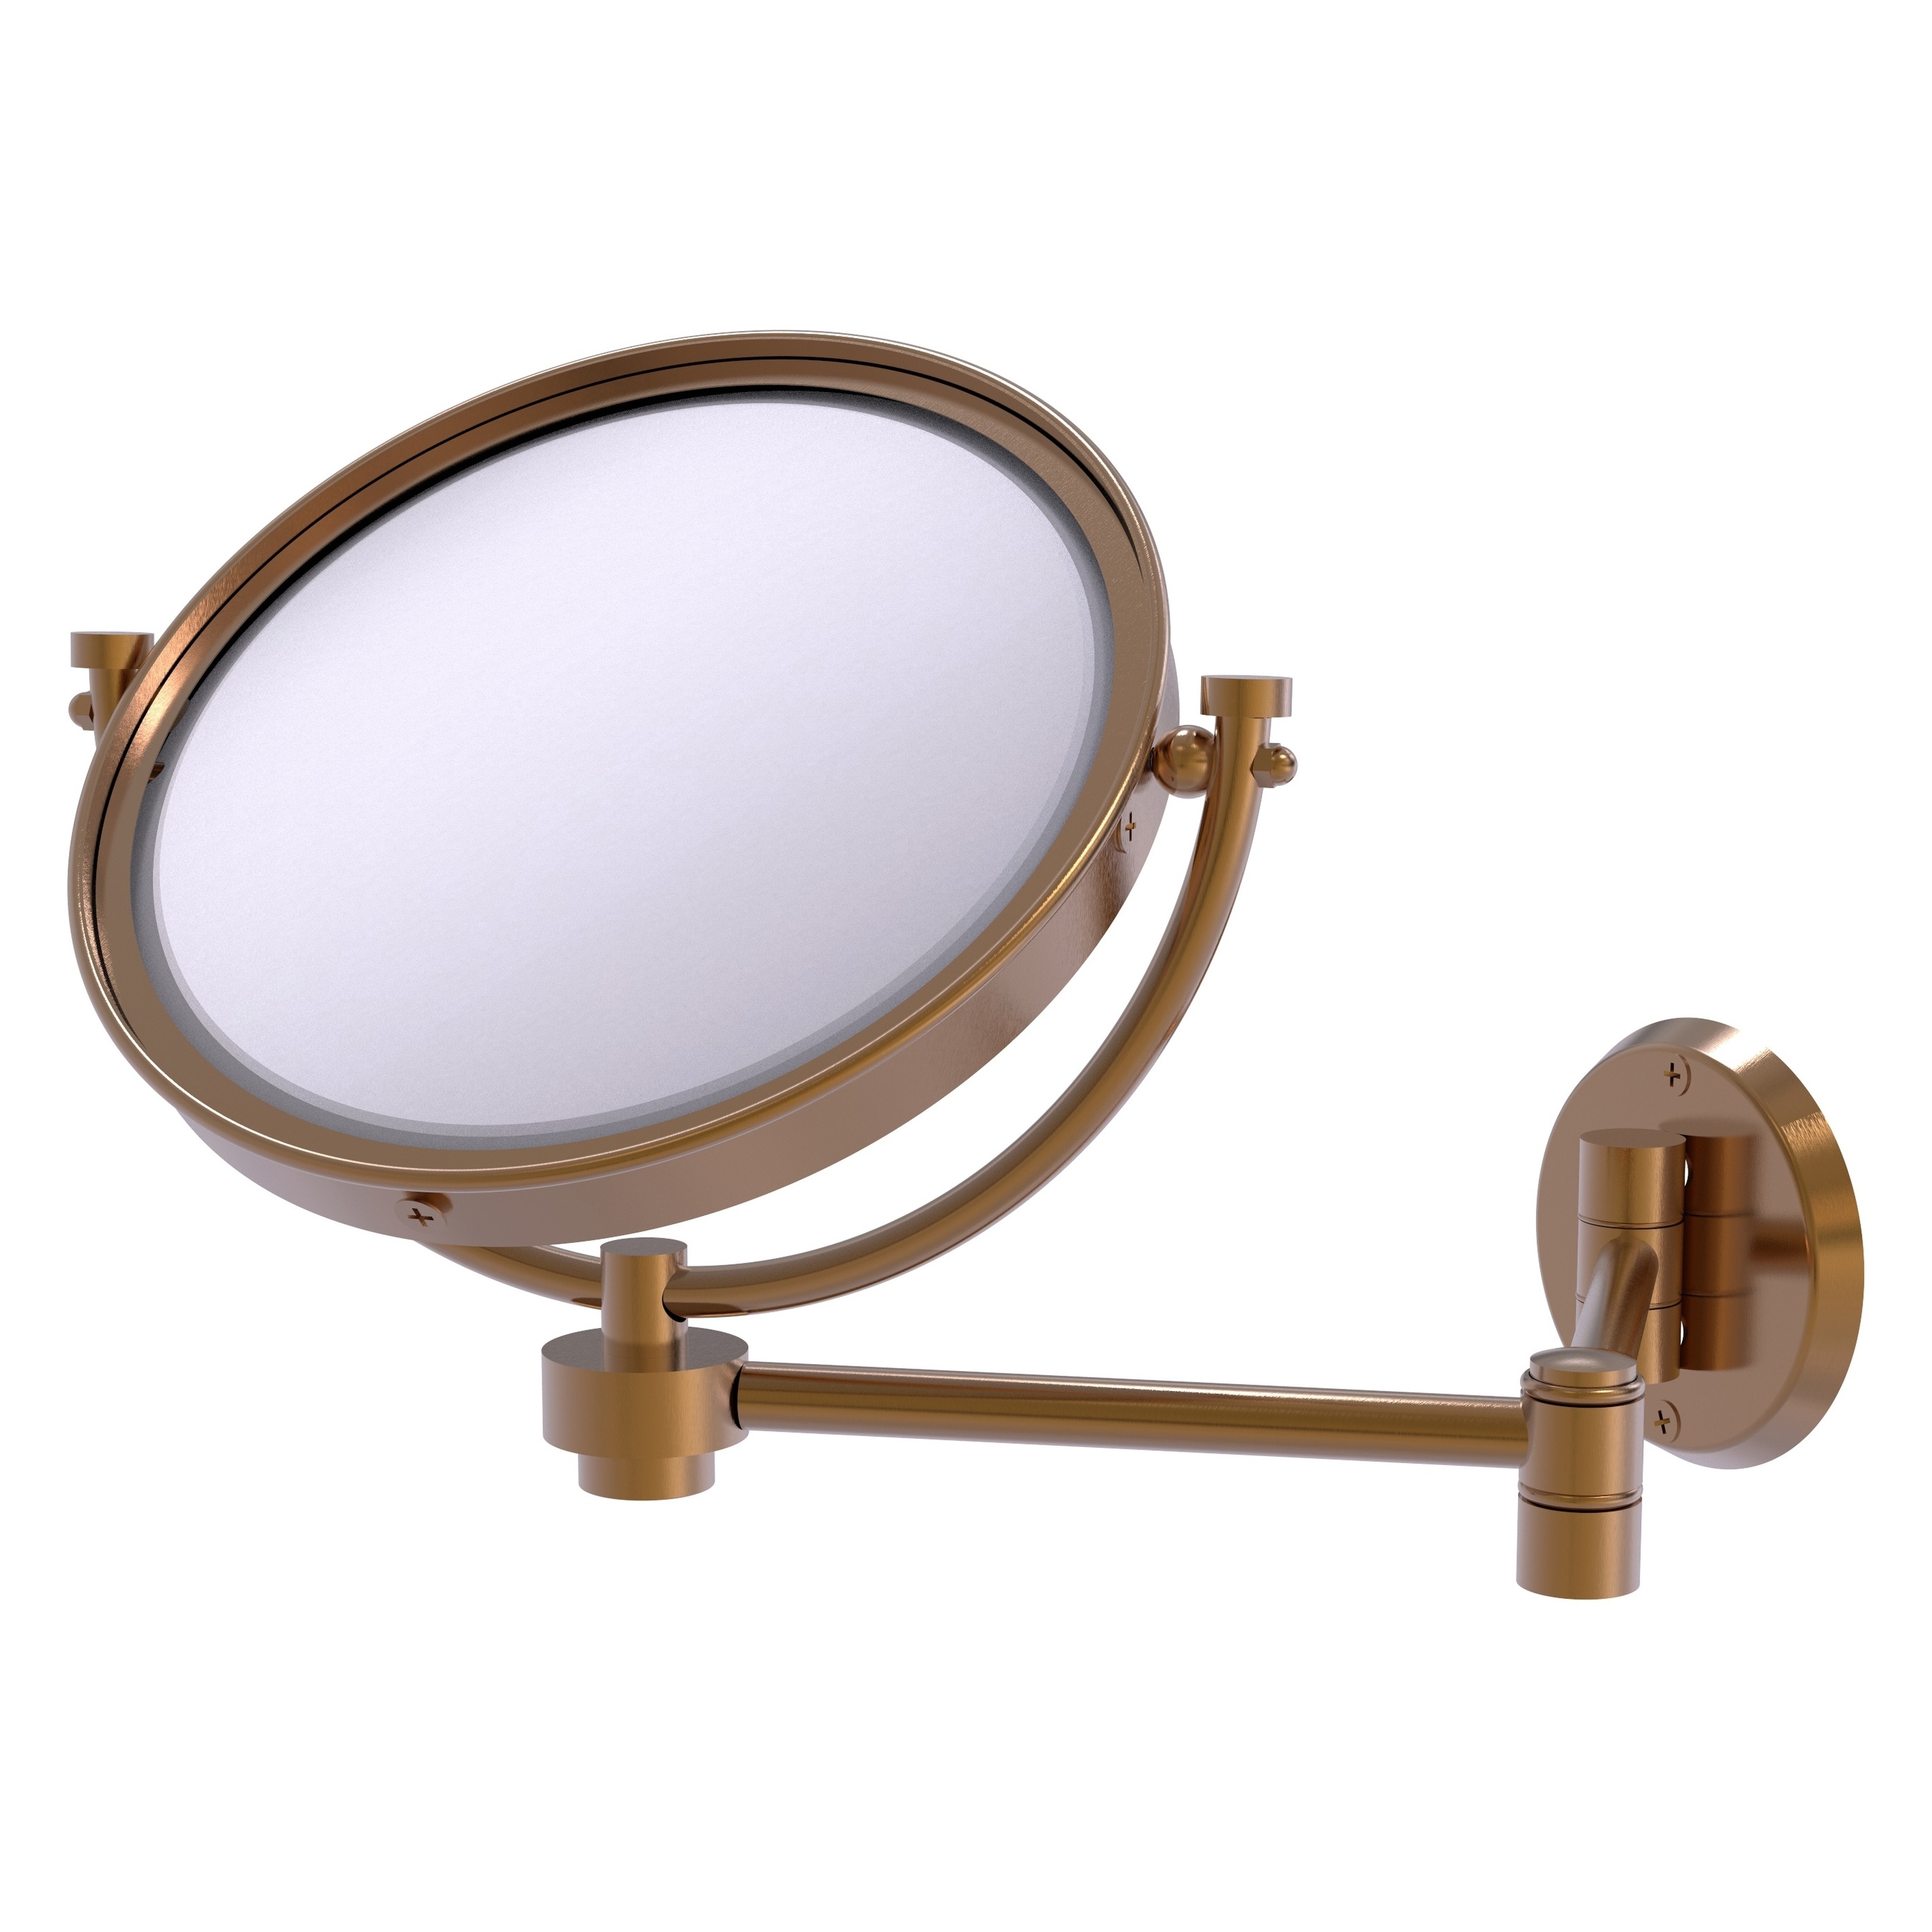 8-in x 10-in Brushed Copper Double-sided 2X Magnifying Wall-mounted Vanity Mirror | - Allied Brass WM-6/2X-BBR